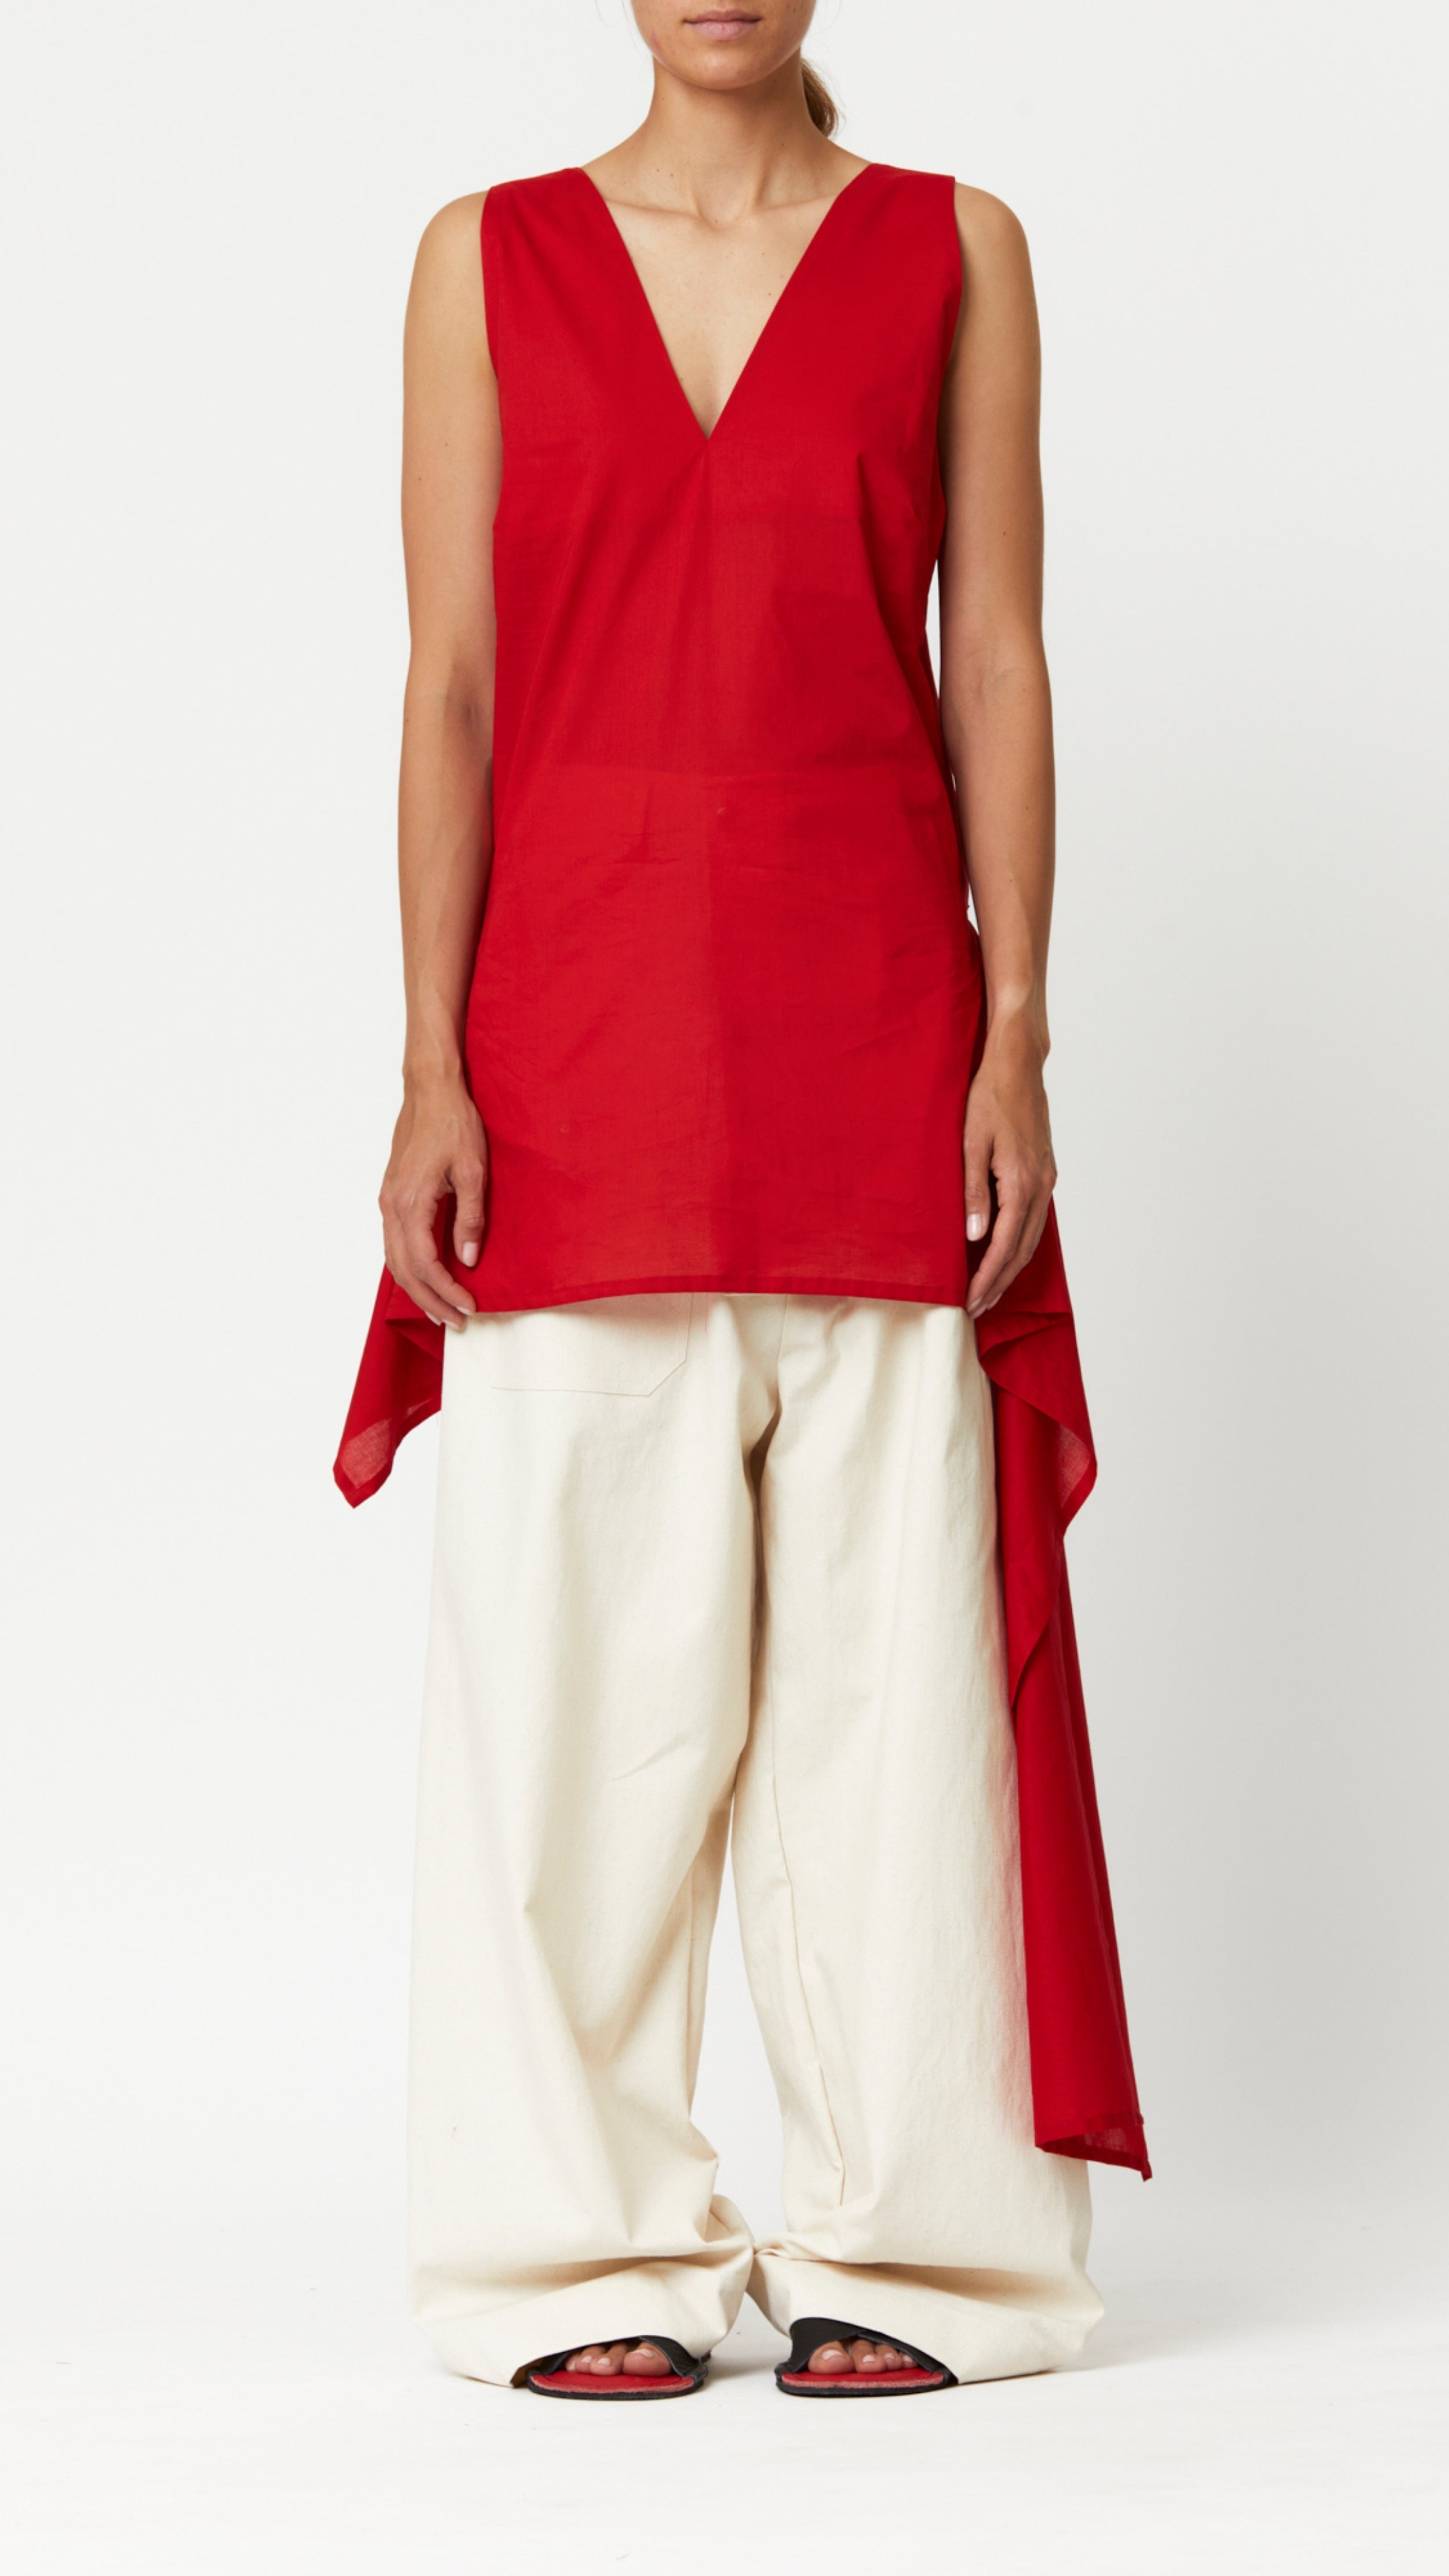 Plan C Tank Top in Fire Red Red cotton poplin long tank top style with v neckline and long side tail. It has an internal tie at the waist to wear more fitted or loose, Shown on model facing front.